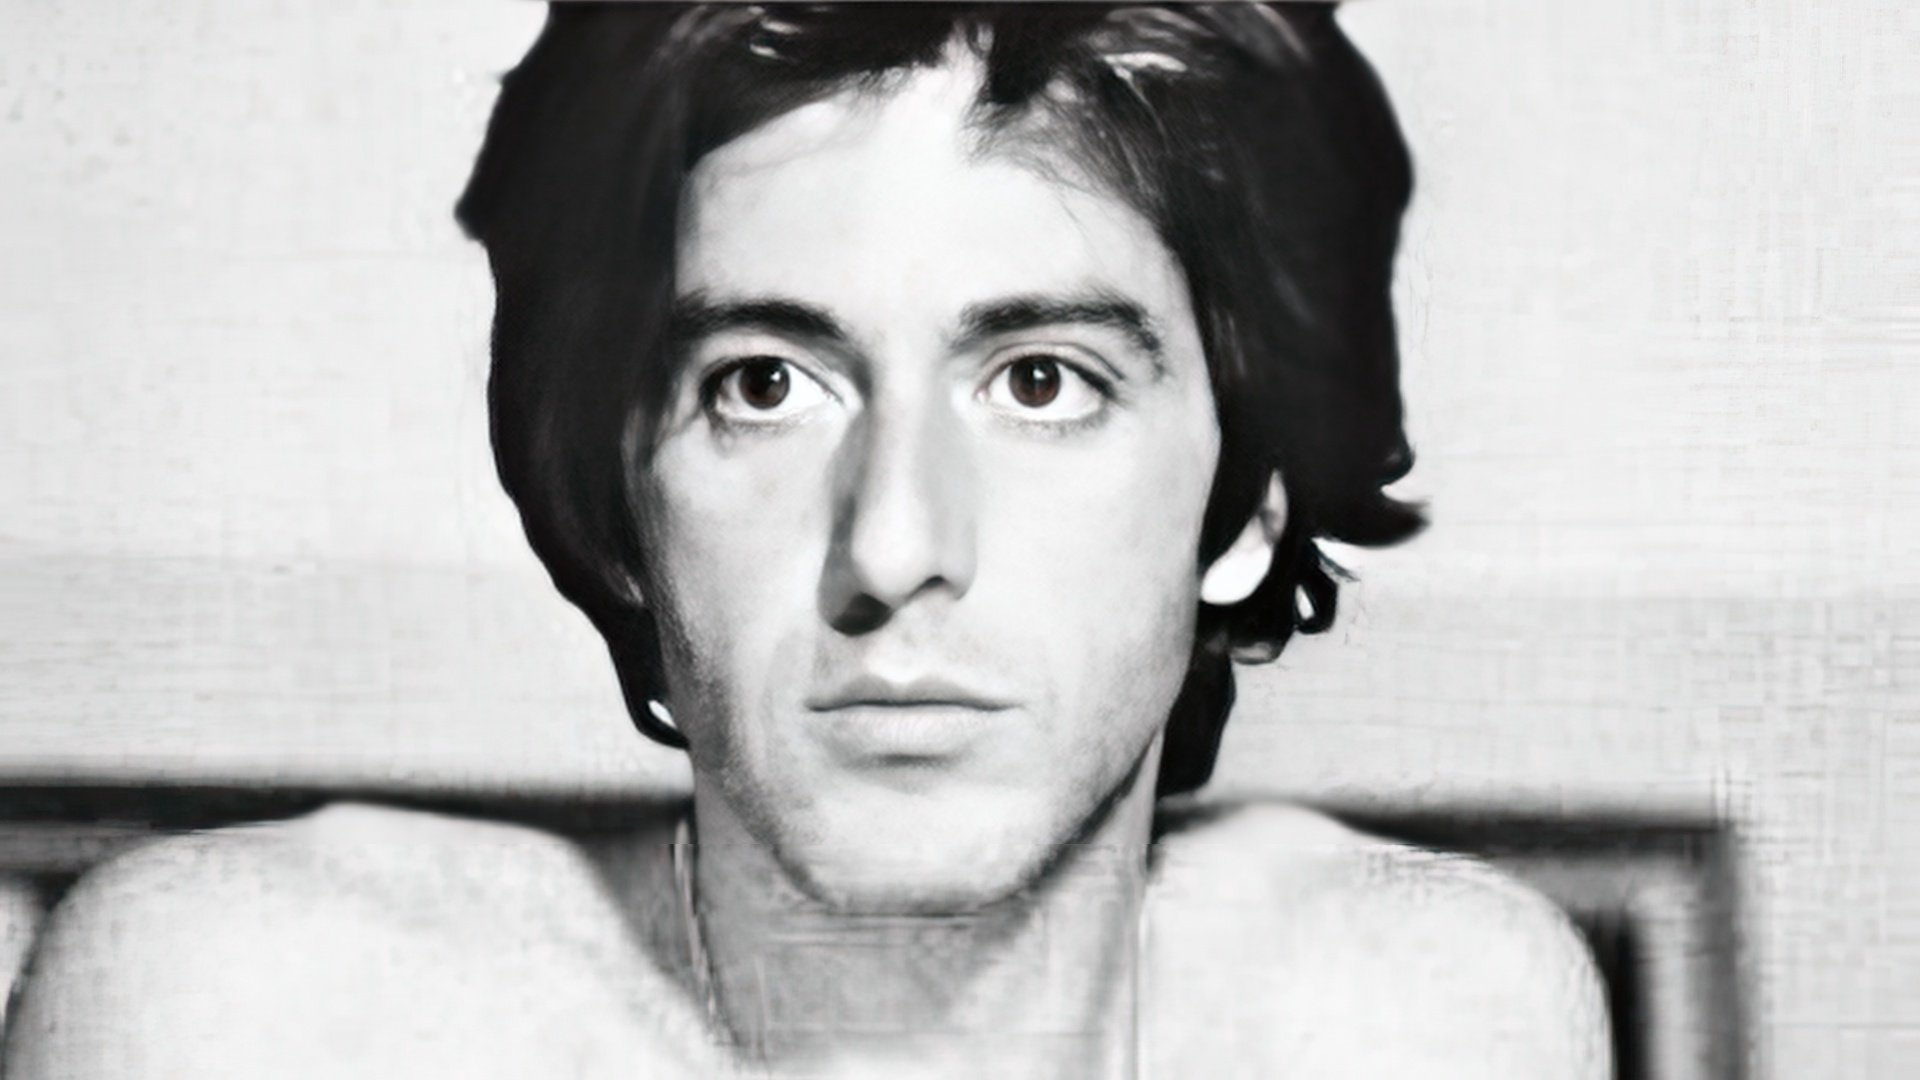 Al Pacino’s theatrical career began with free performances